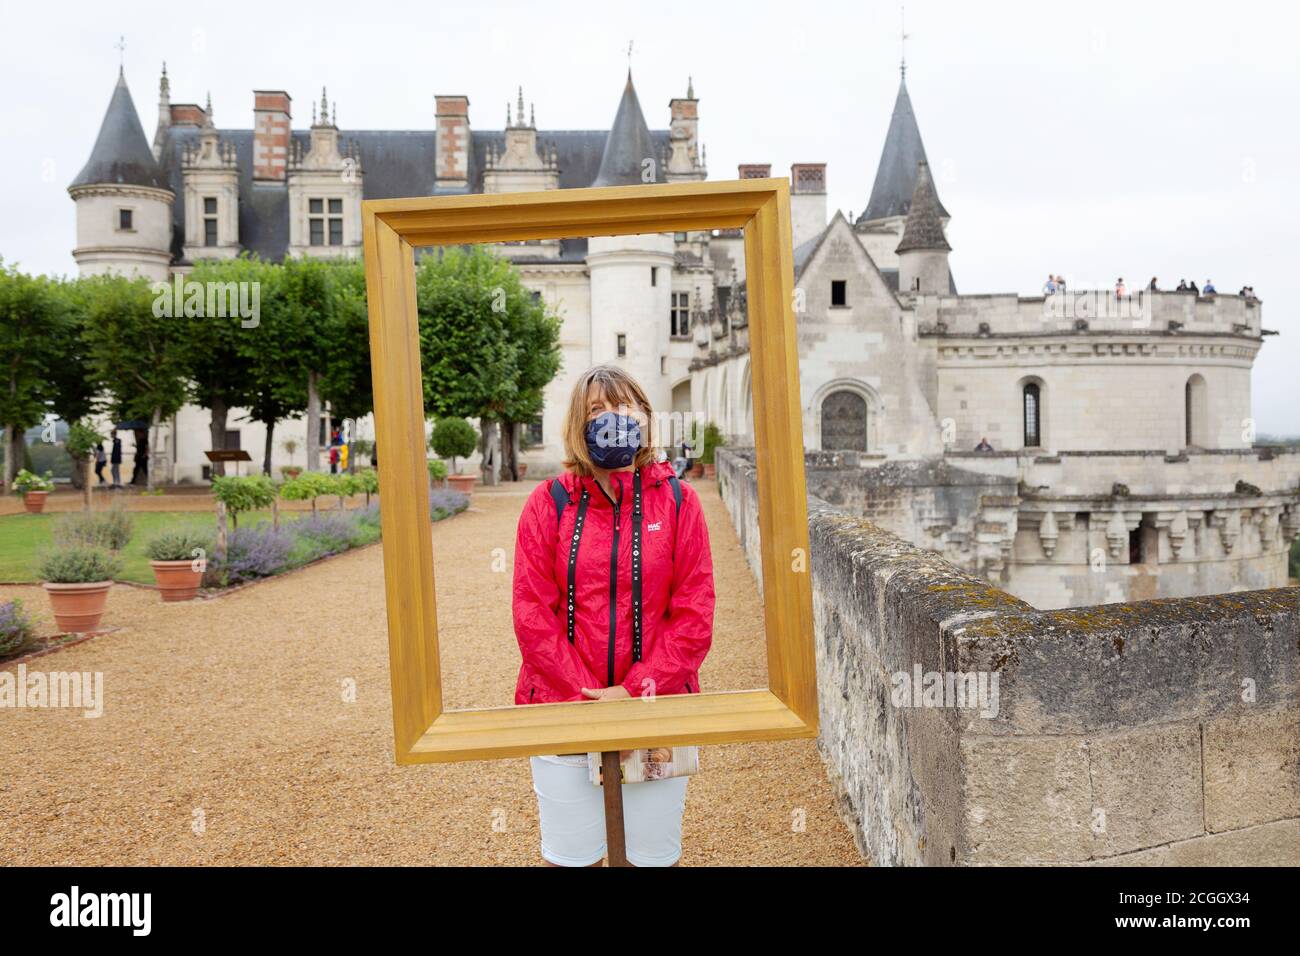 Covid 19 travel. An english tourist posing for a photo at Chateau Amboise, France, during the pandemic, August 2020. (Main tourist is model released). Stock Photo